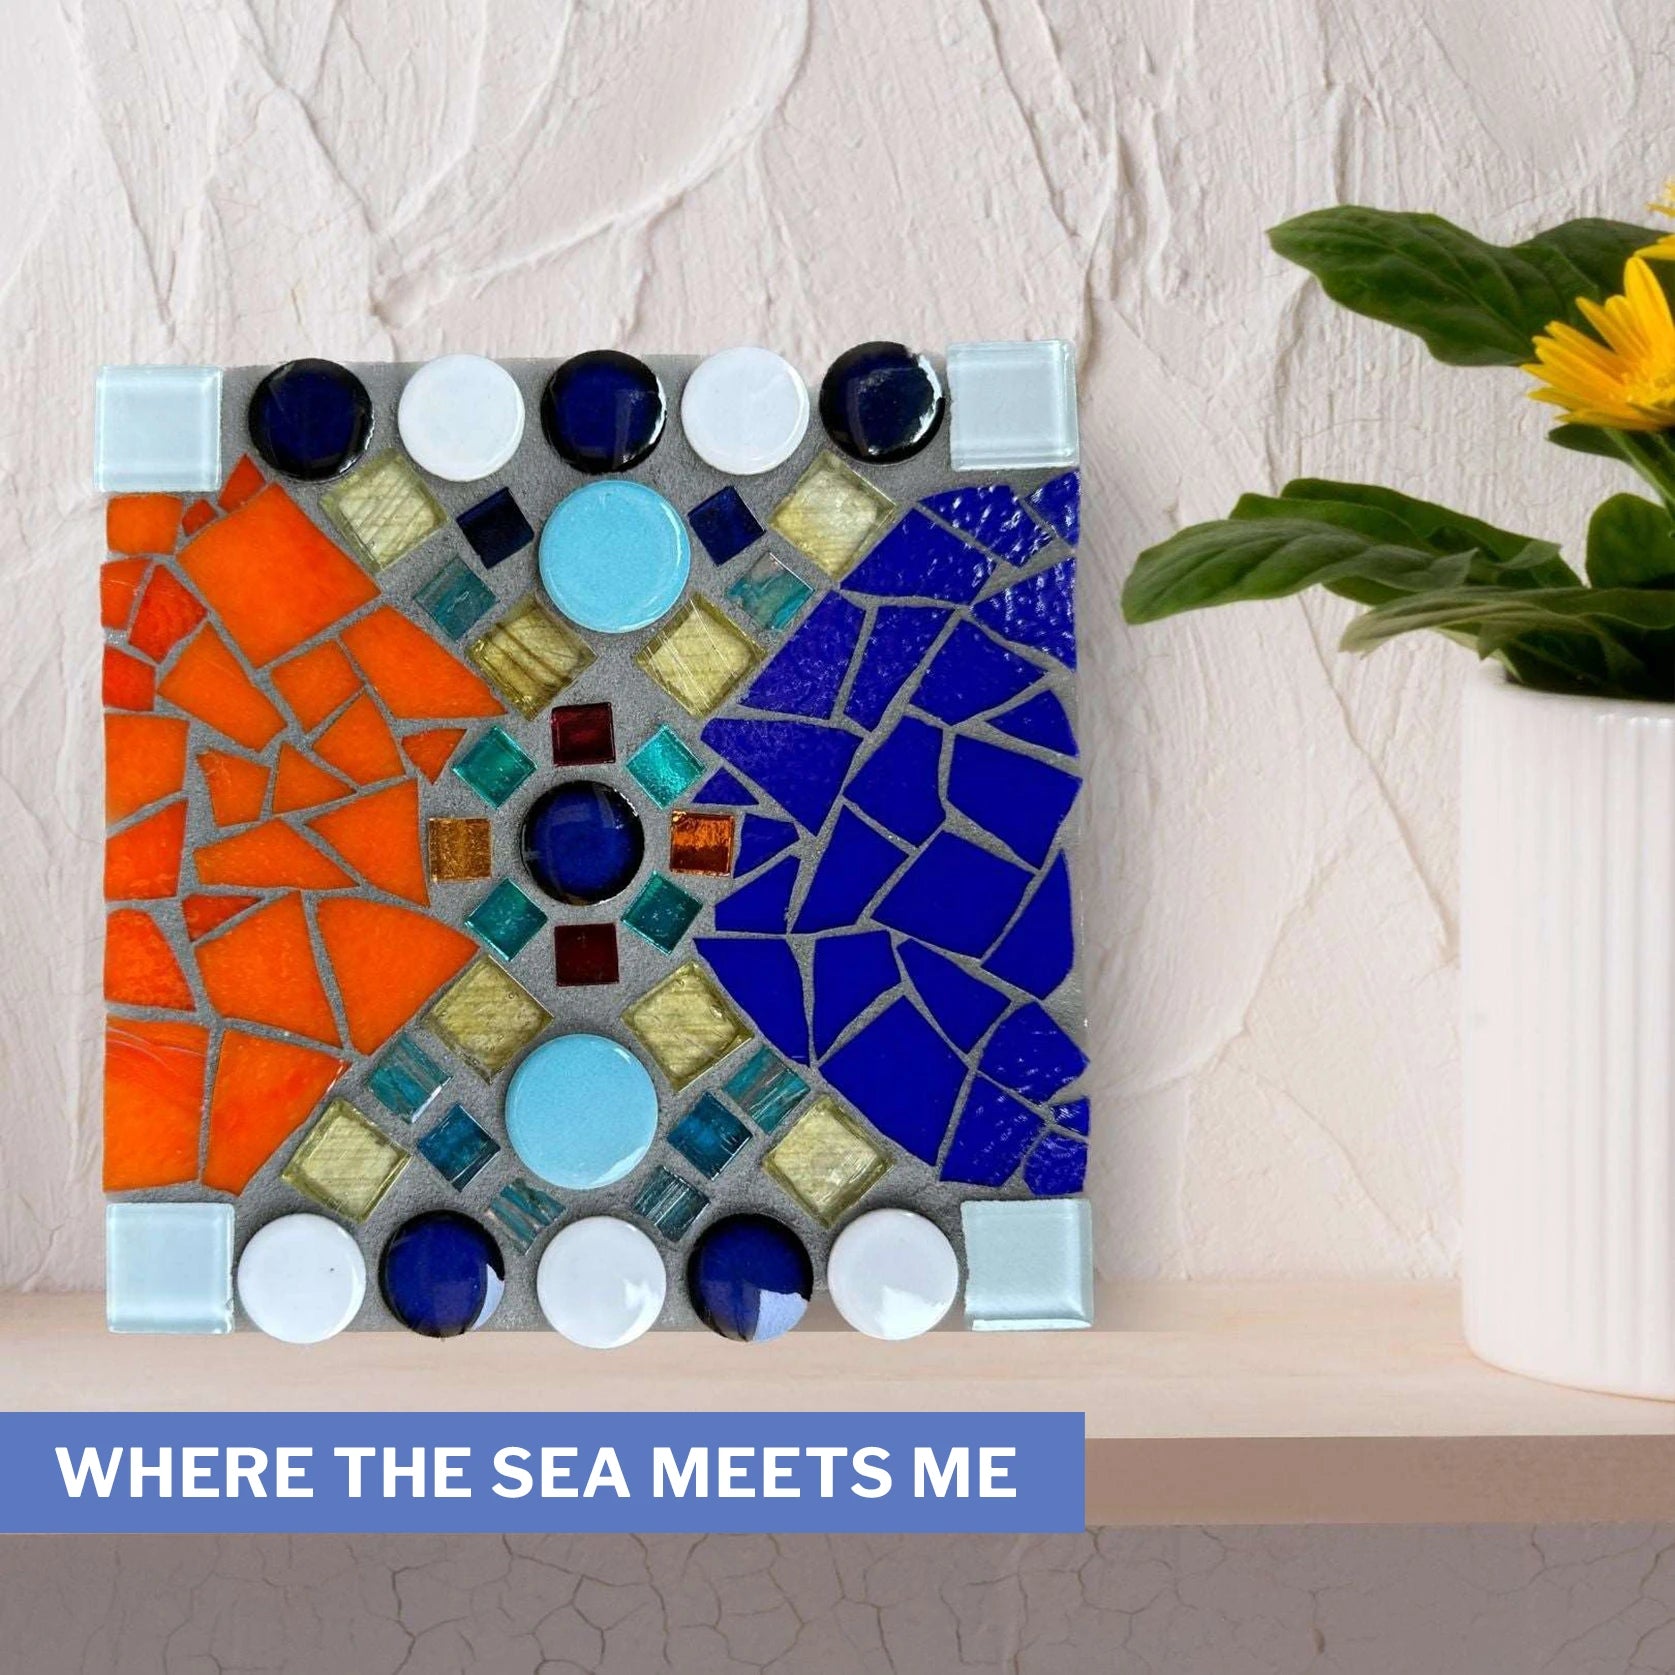 6" Abstract Tiles – Choose Your Design